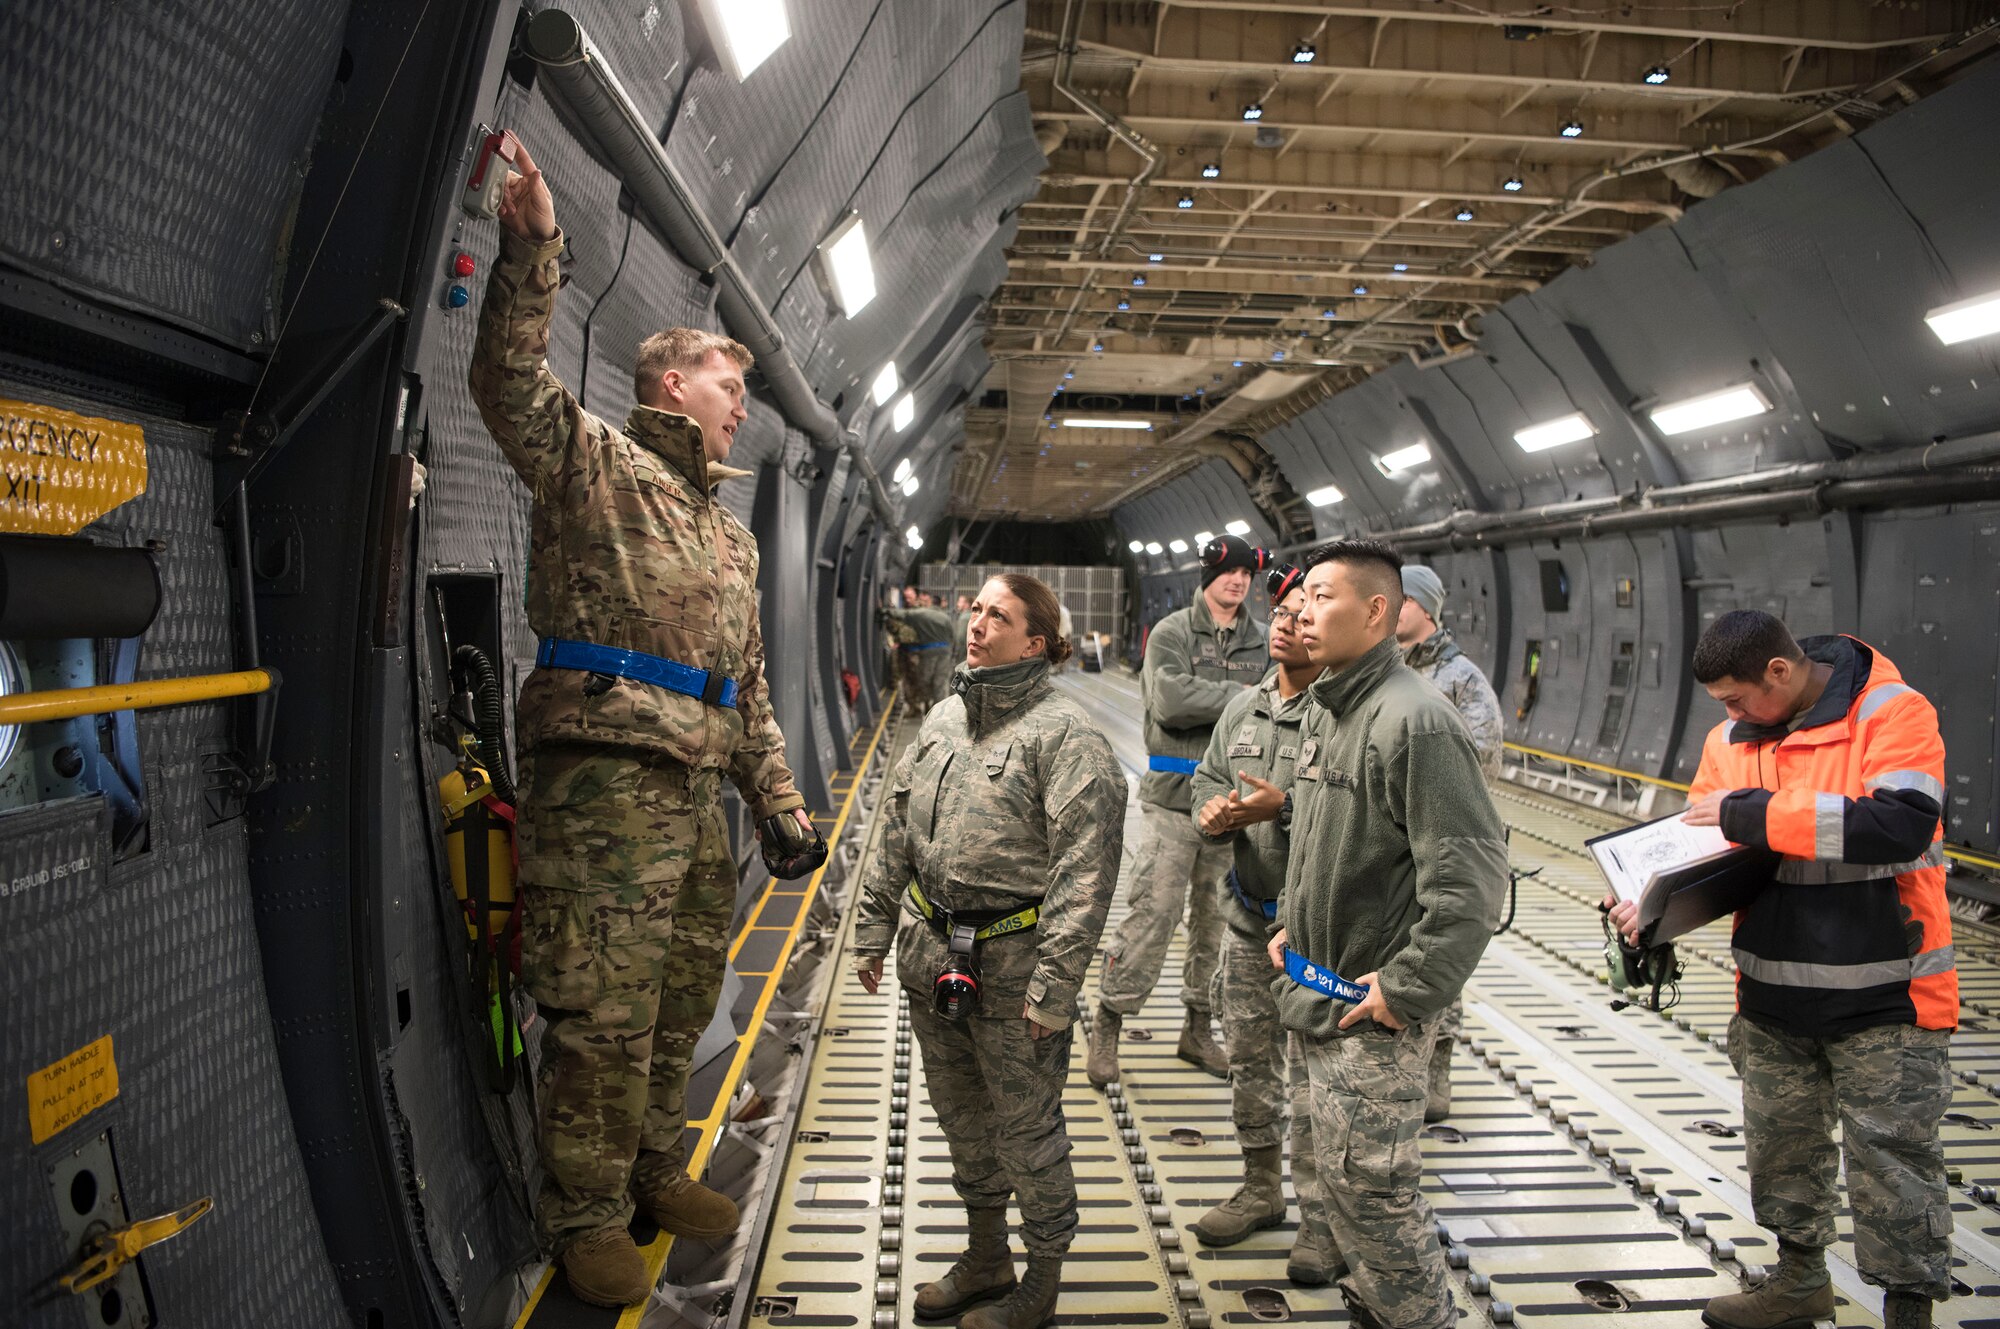 U.S. Air Force Staff Sgt. Brett Anger, 521st Air Mobility Operations Wing electrical and environmental systems instructor, shows Airmen where the safety wire is located on the emergency pull-light, which indicates the system has not been tampered with, Dec. 3, 2018, on Ramstein Air Base, Germany. This task was one of the approximately 1,000 tasks 141 students learned and trained on throughout the two week training exercise. (U.S. Air Force photo by Airman 1st Class Kristof J. Rixmann)